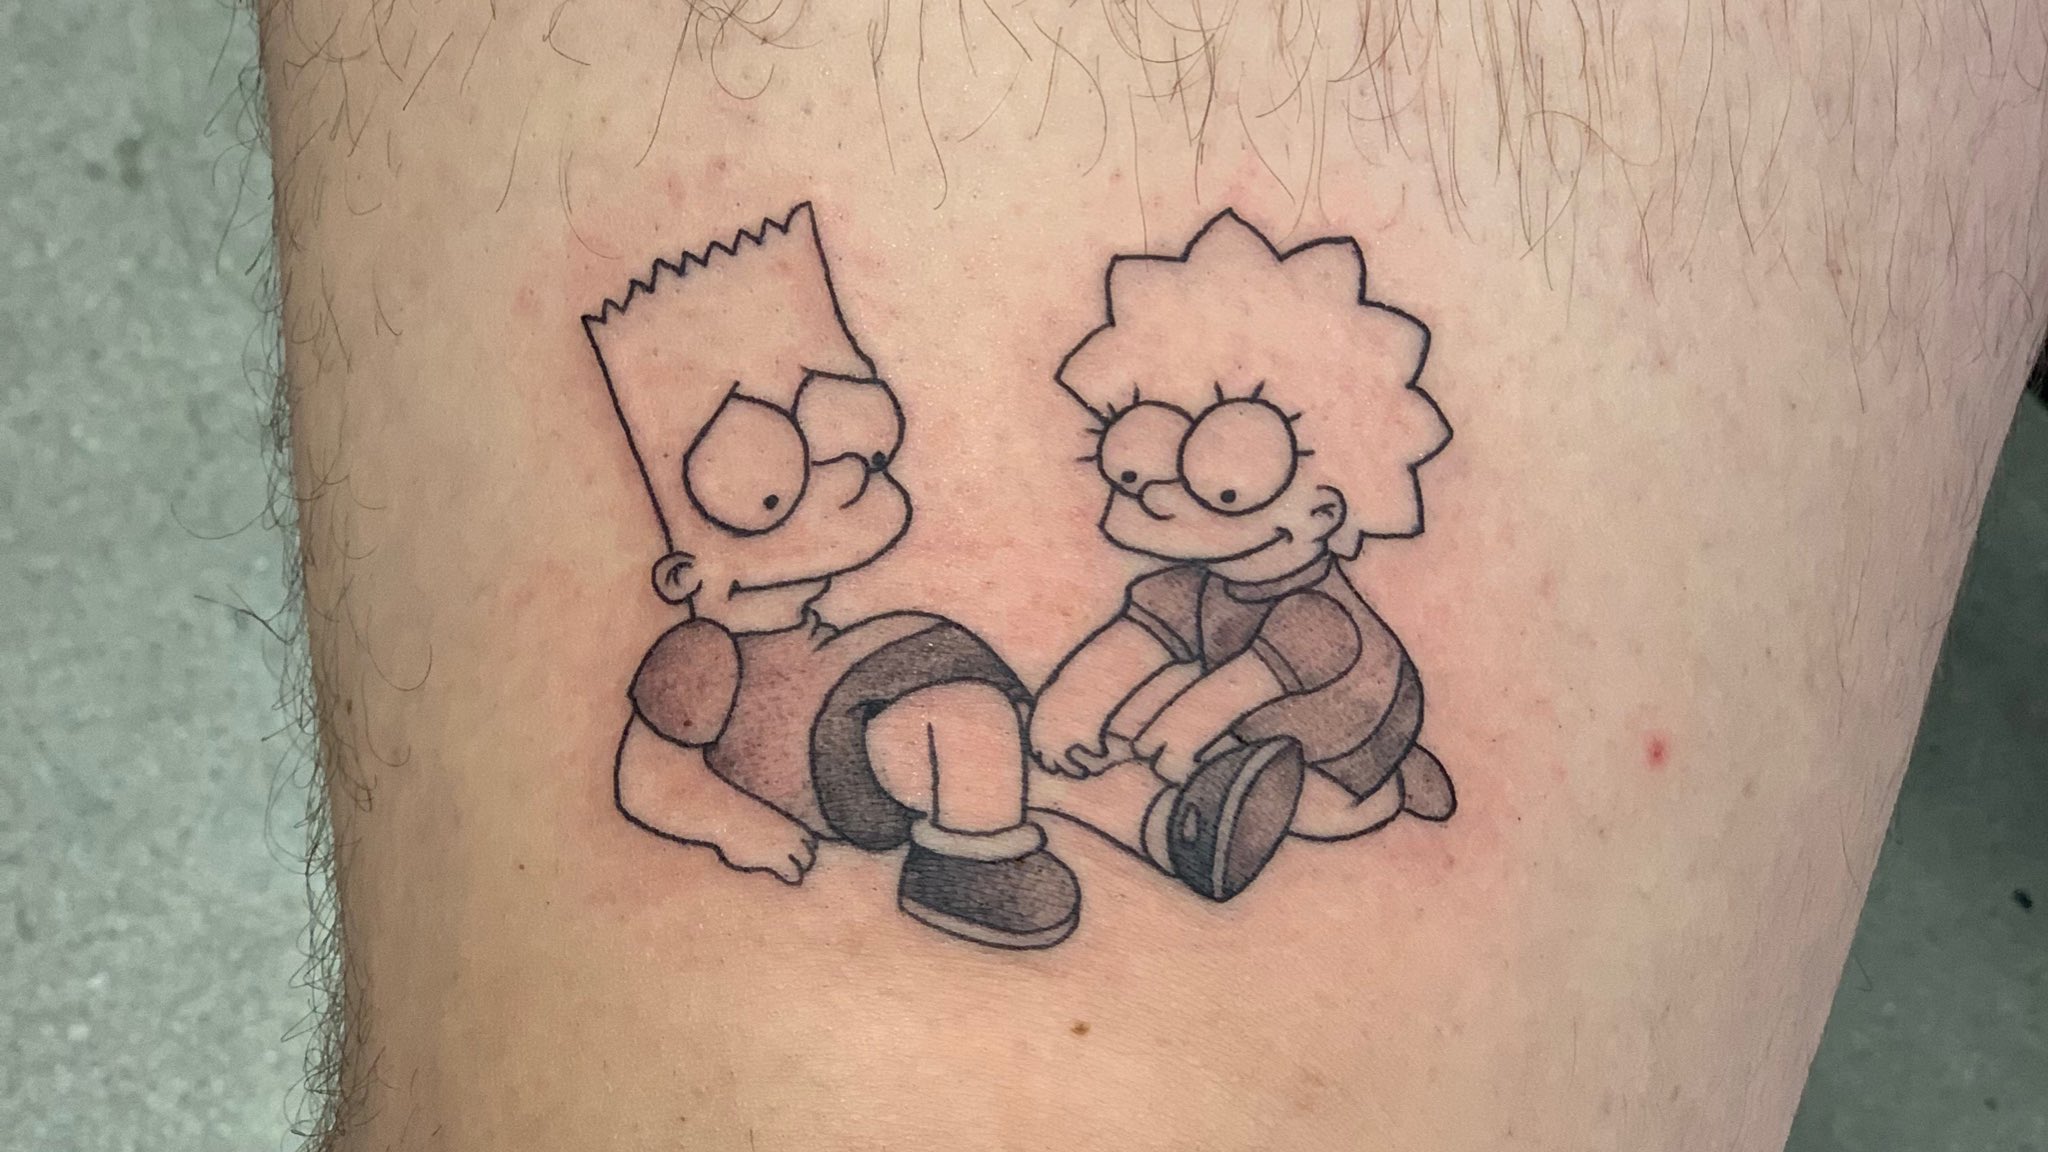 Tattoo uploaded by Justine Morrow  Simpsons sibling tattoo by Samantha  Ross SamanthaRoss sistertattoos sisters sistertattooidea familytattoo  siblingtattoo matchingtattoo bfftattoo brotherandsistertattoo  broandsis simpsons cartoon tvshow 